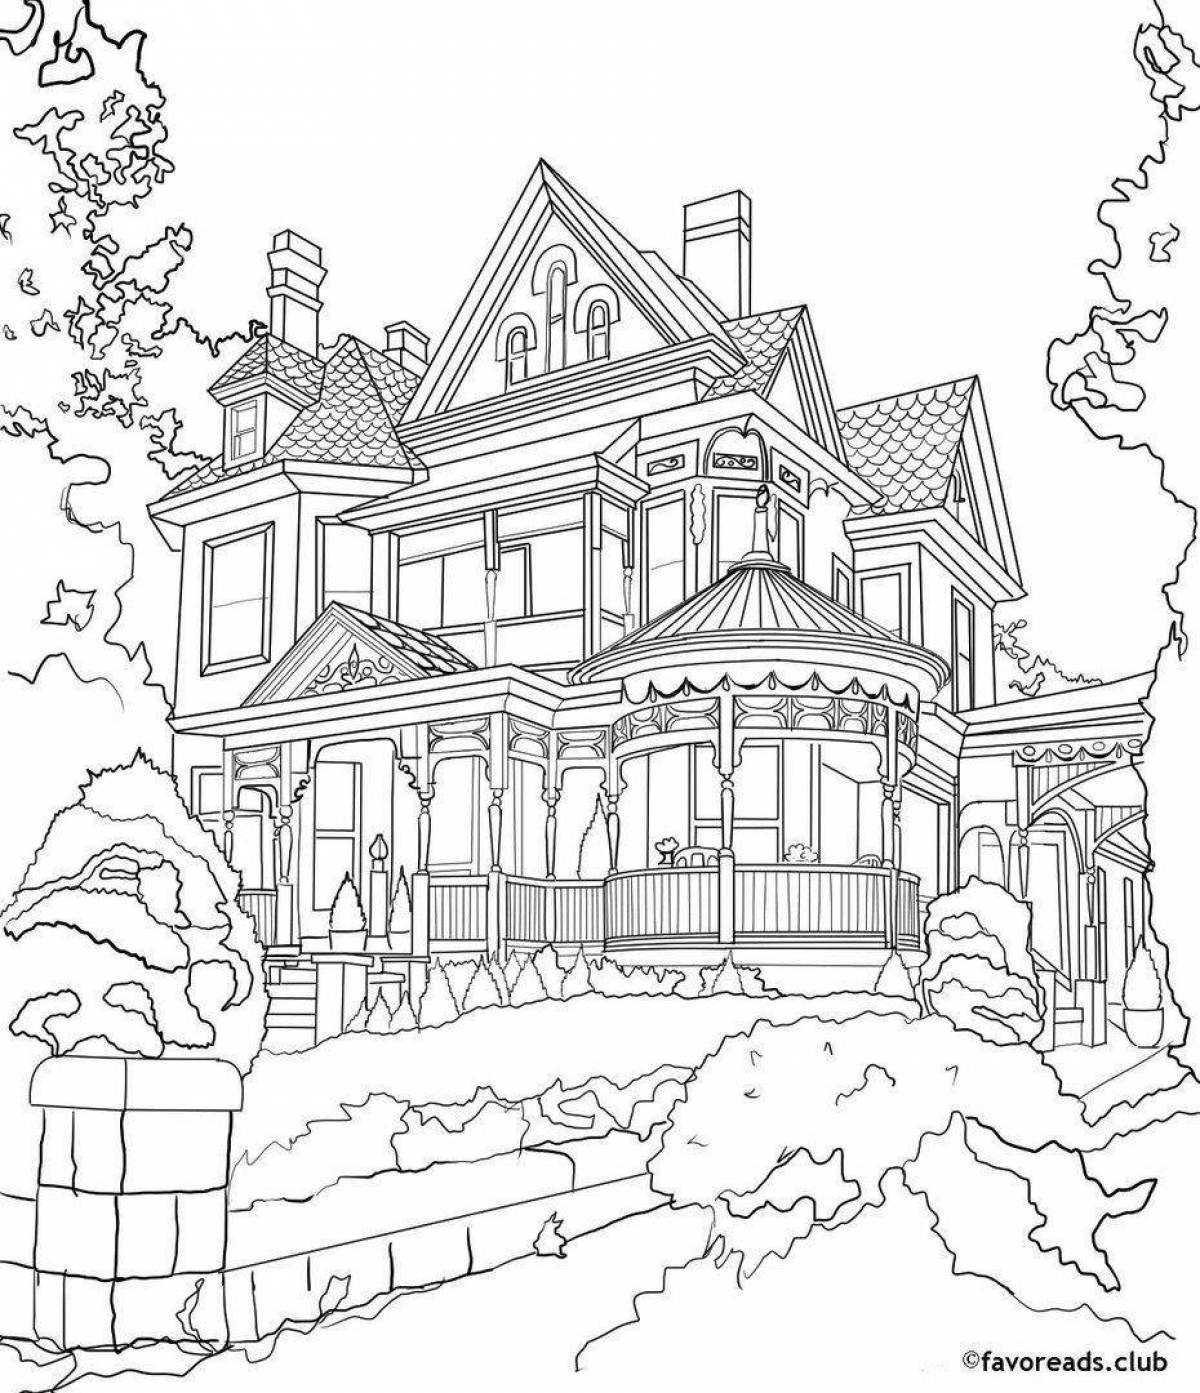 Colour-filled cottage coloring page